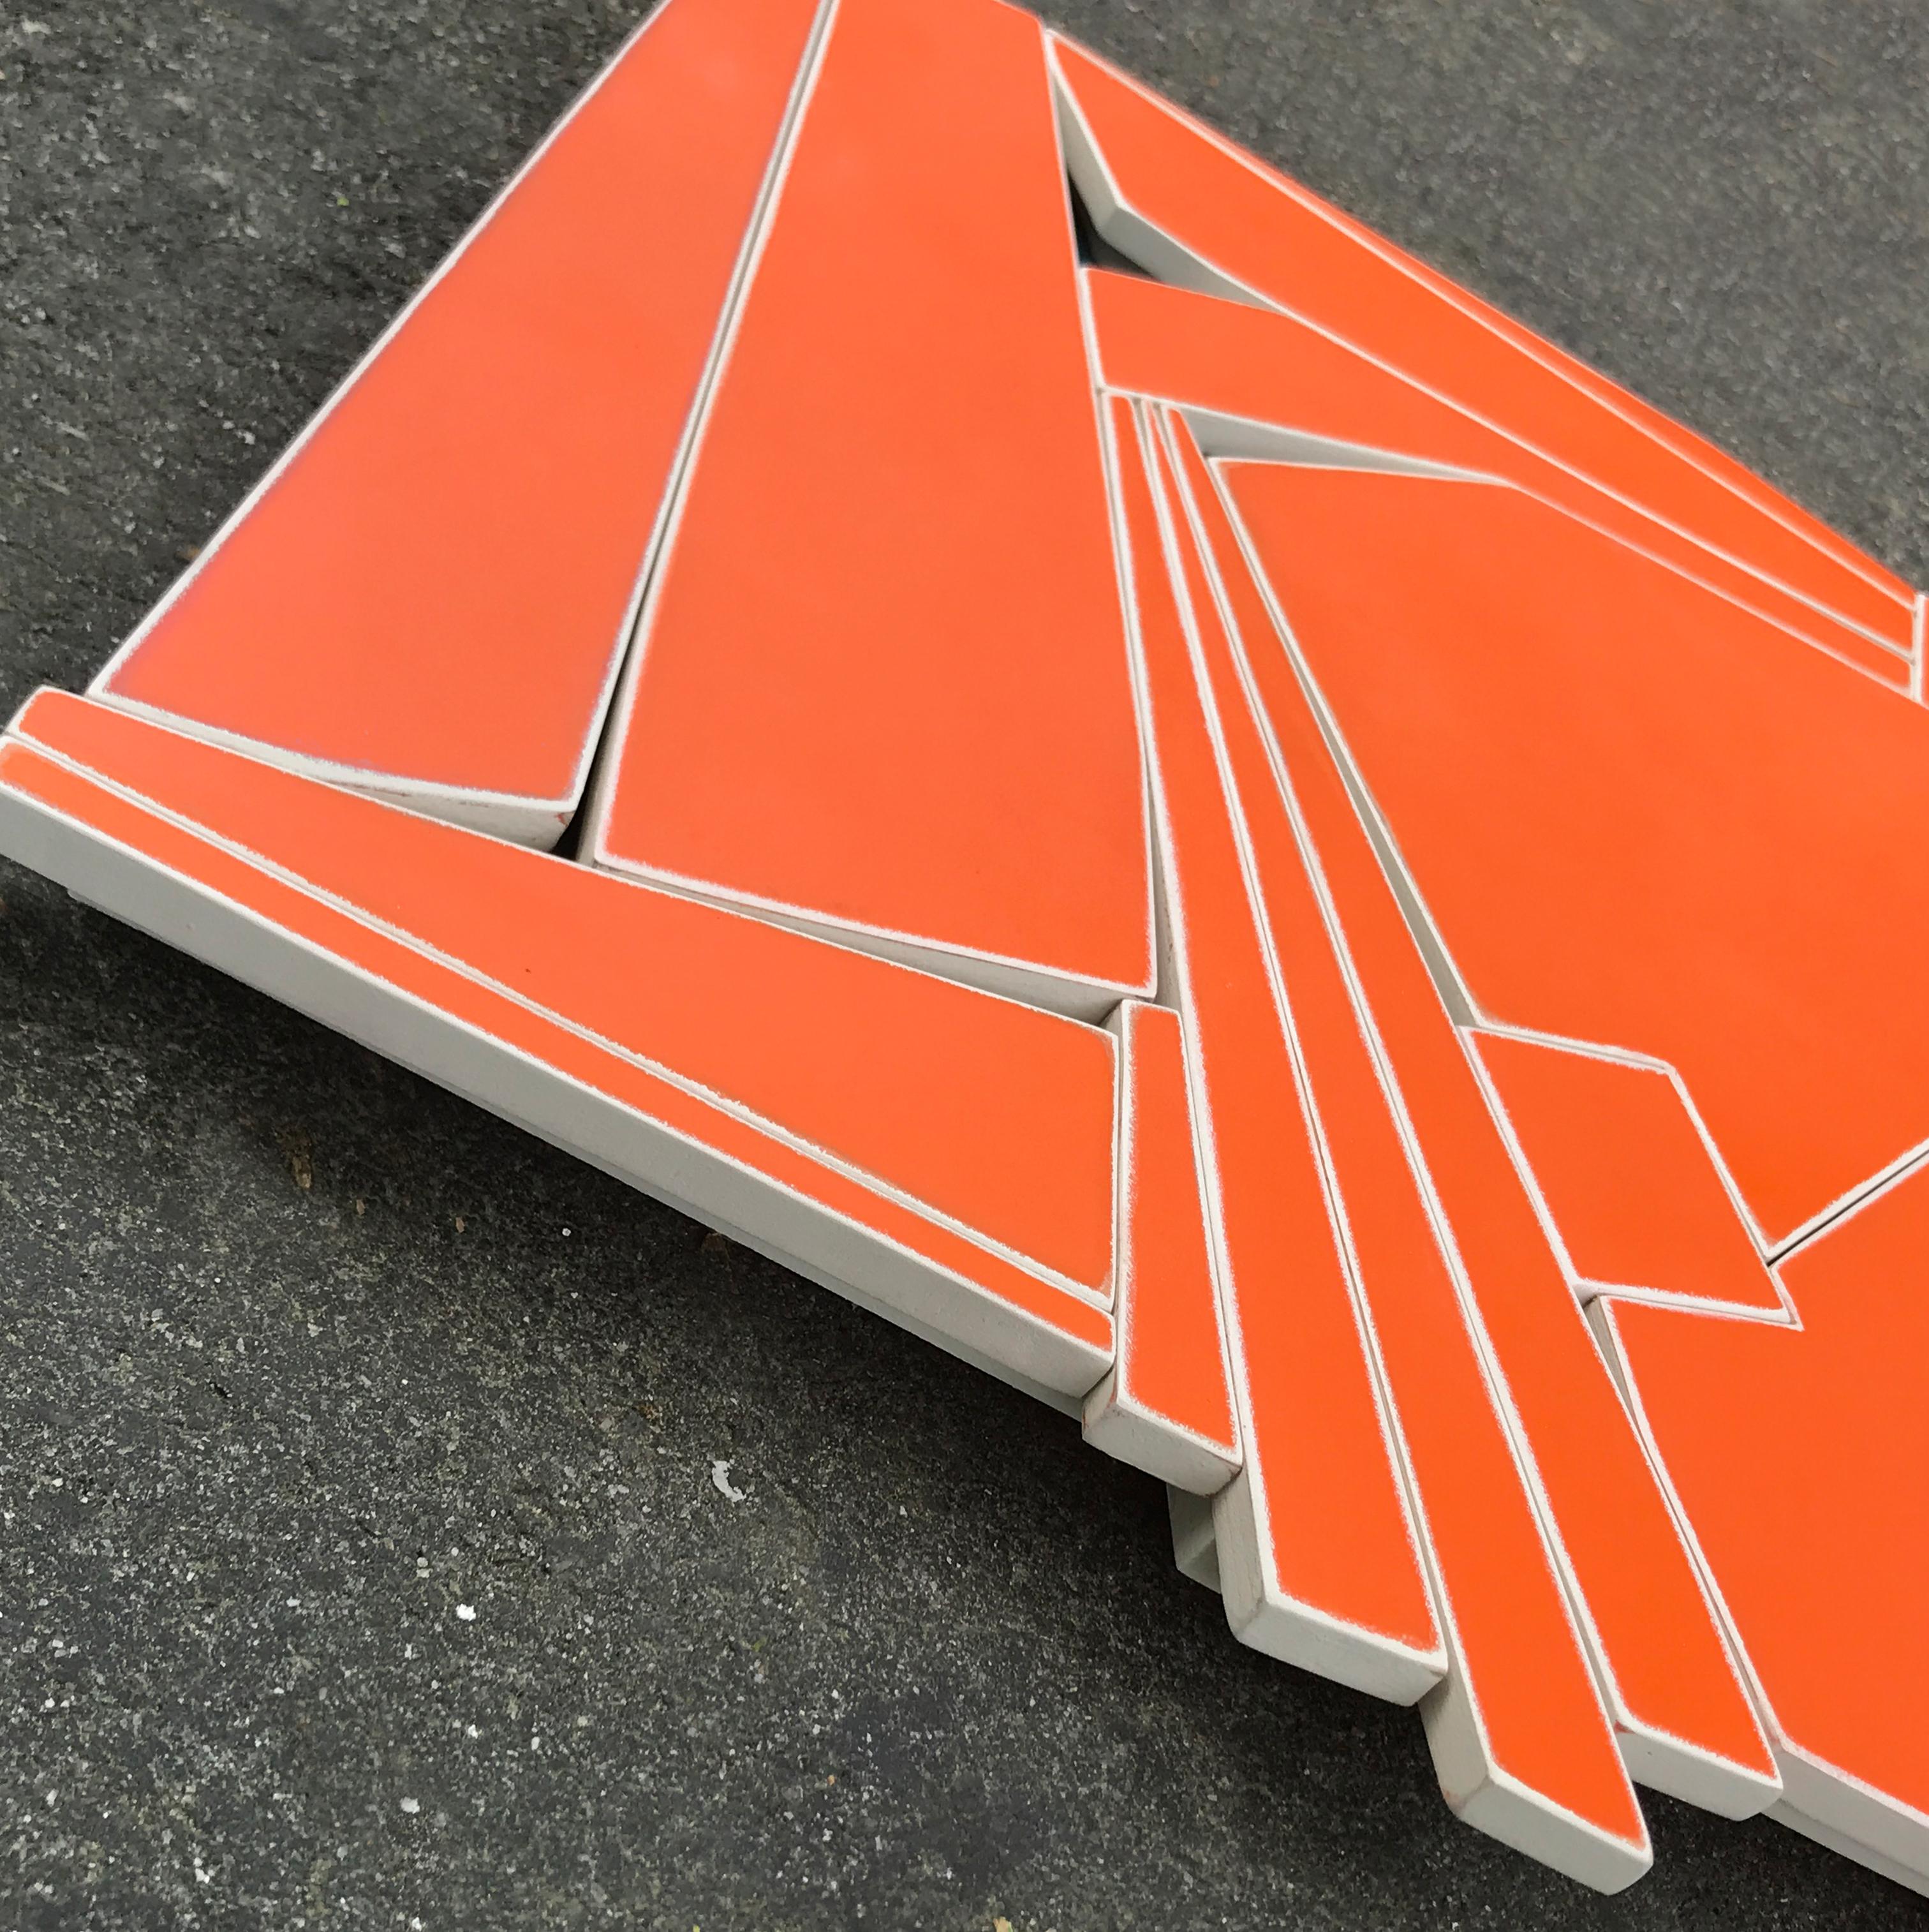 Tangerine is a modern mixed media wall sculpture, constructed from MDF, acrylic and varnish. The bold but limited monochrome color palette emphasizes the form and composition over a broad color palette. I designed this piece to be somewhat